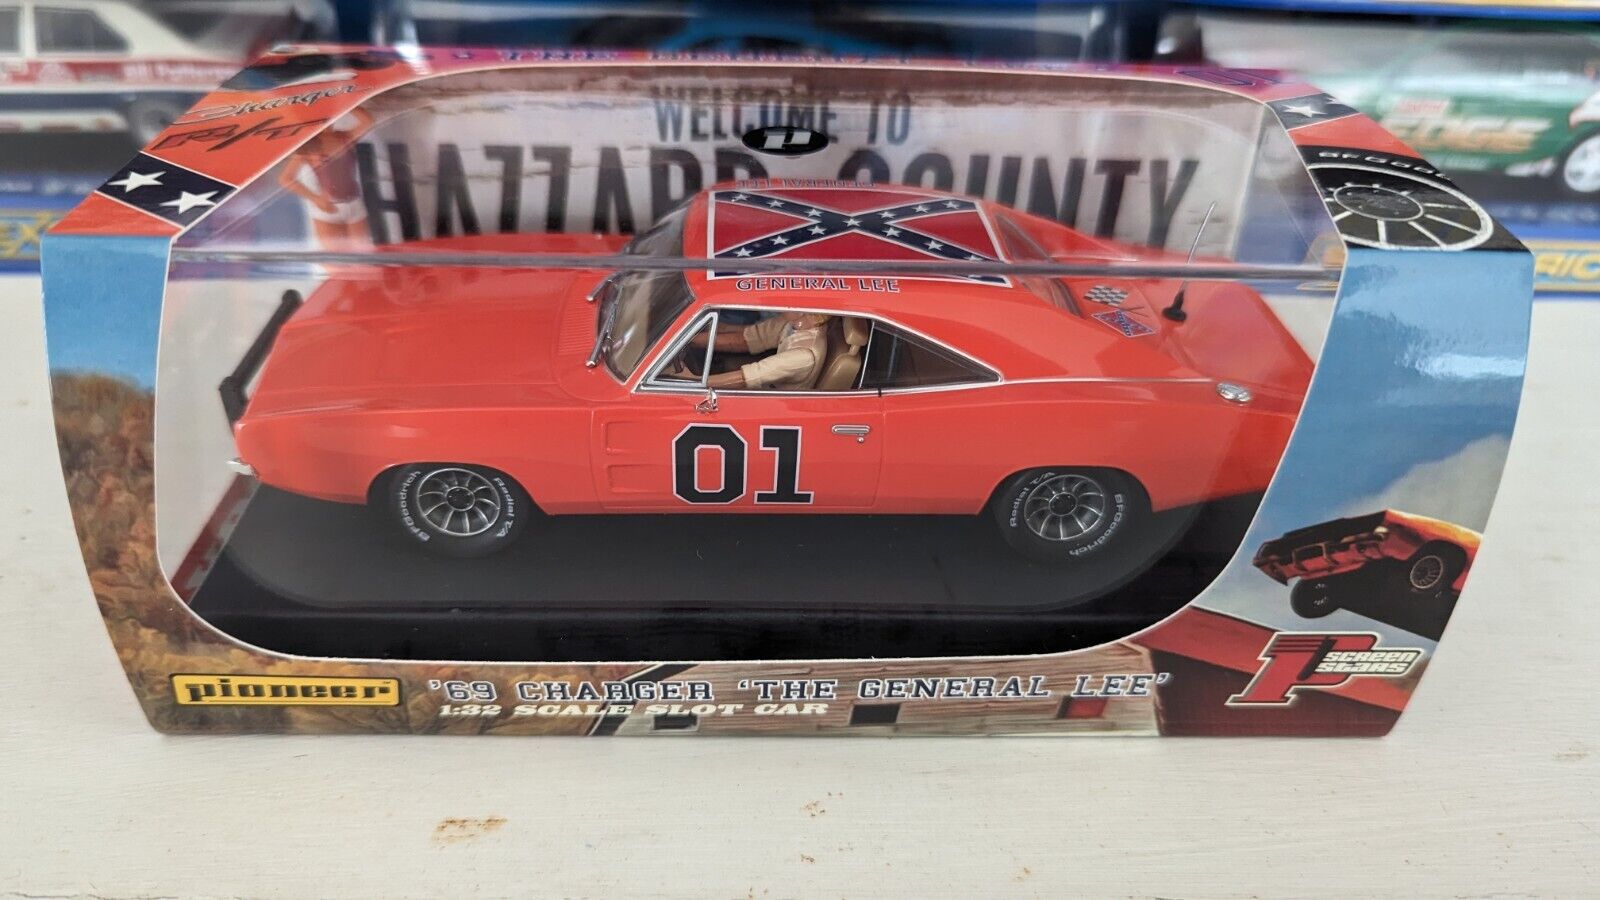 PIONEER P131 DUKES OF HAZZARD DODGE CHARGER -MINT IN ORIGINAL BOX